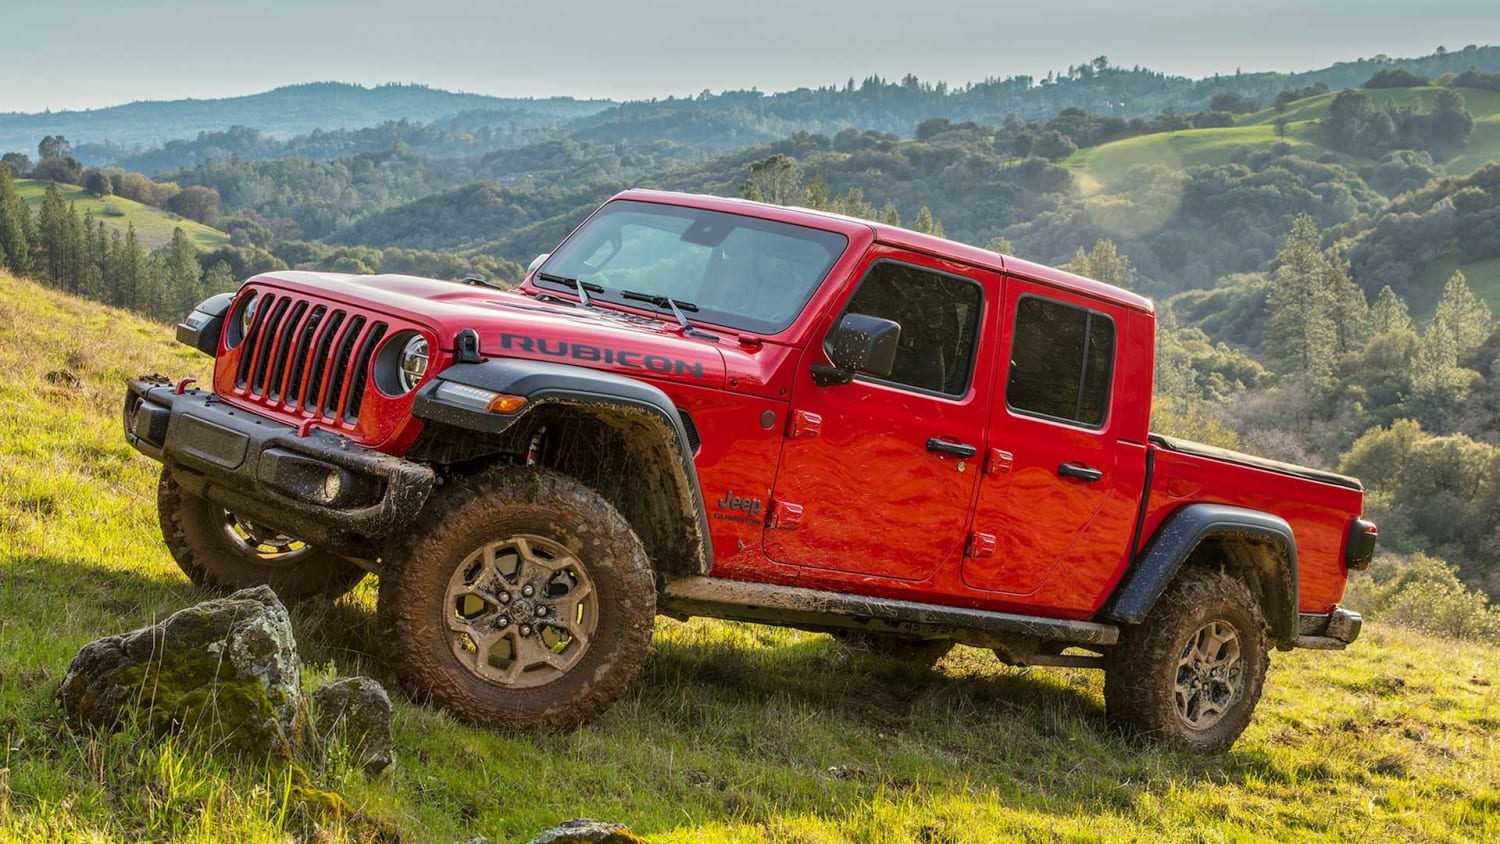 People Are Paying an Average of $56,000 for the 2020 Jeep Gladiator: Report